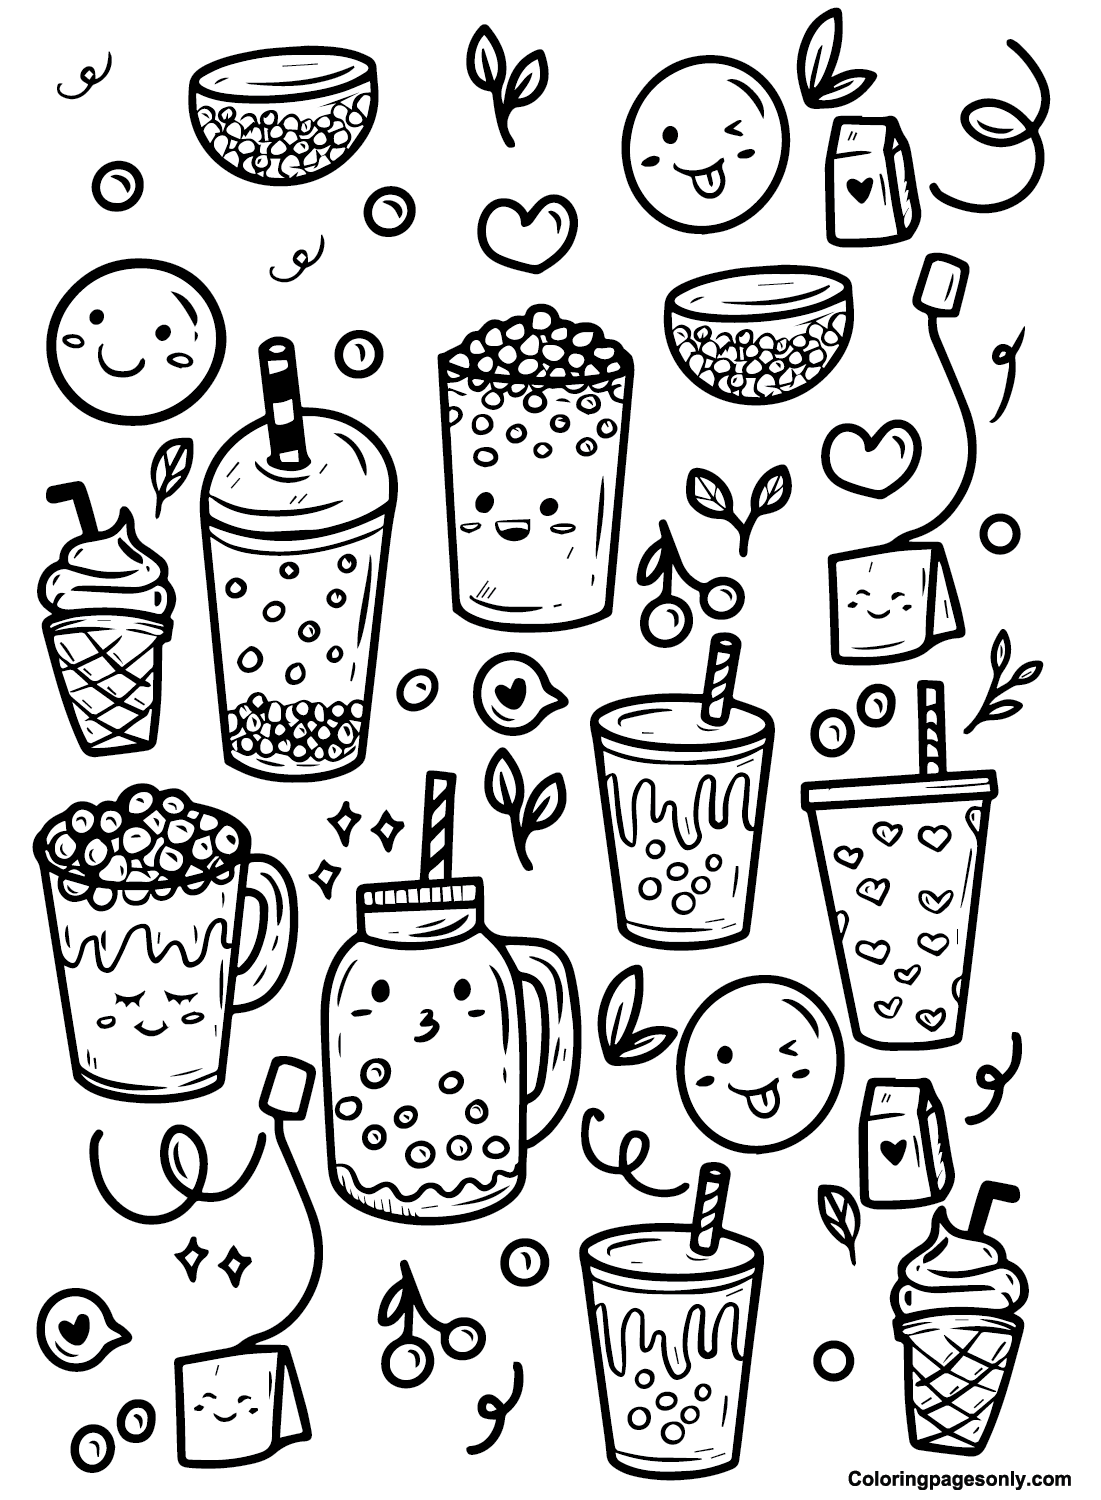 Boba tea coloring pages printable for free download